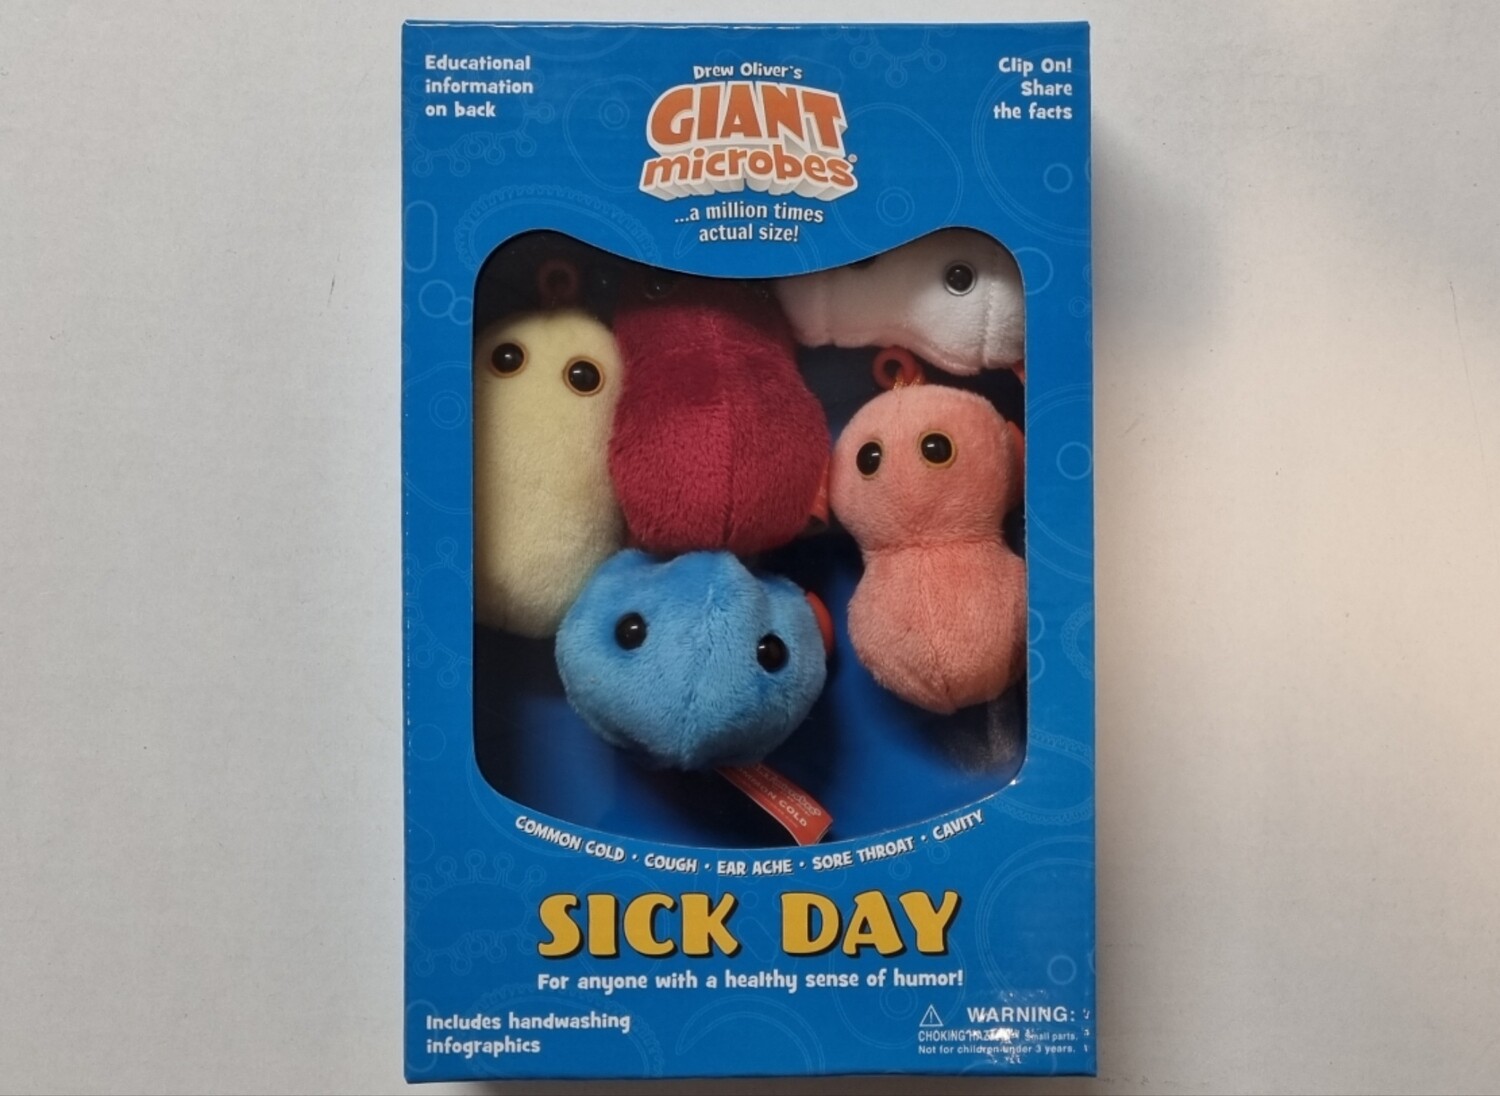 Giant Microbes, Sick Day, Clip on